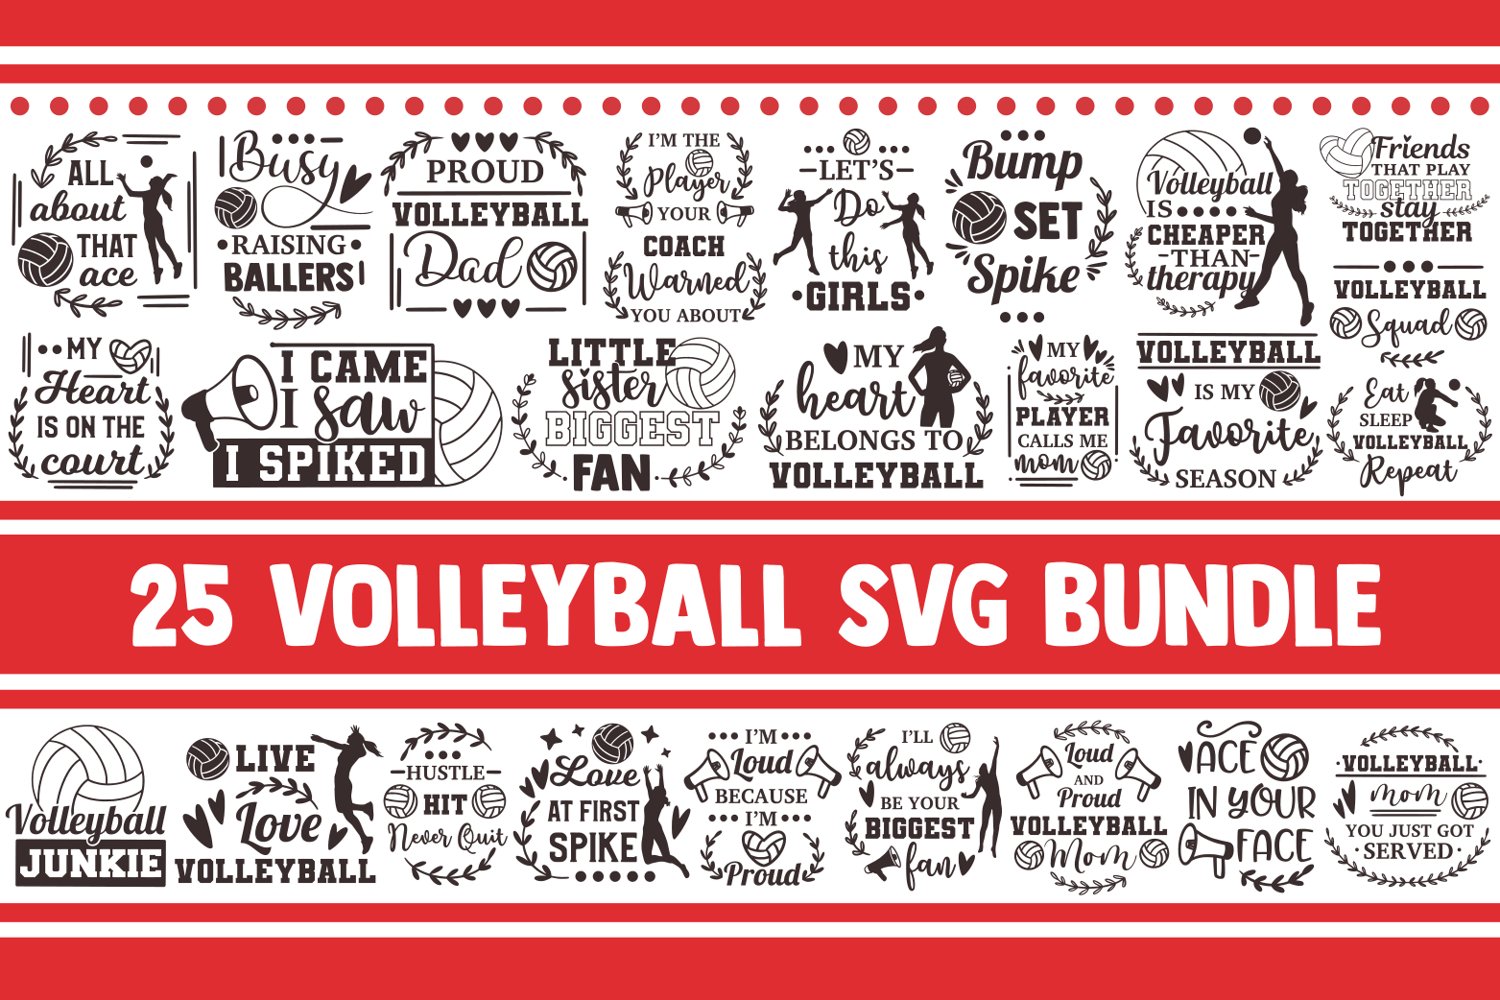 Cover image of volleyball svg bundle.